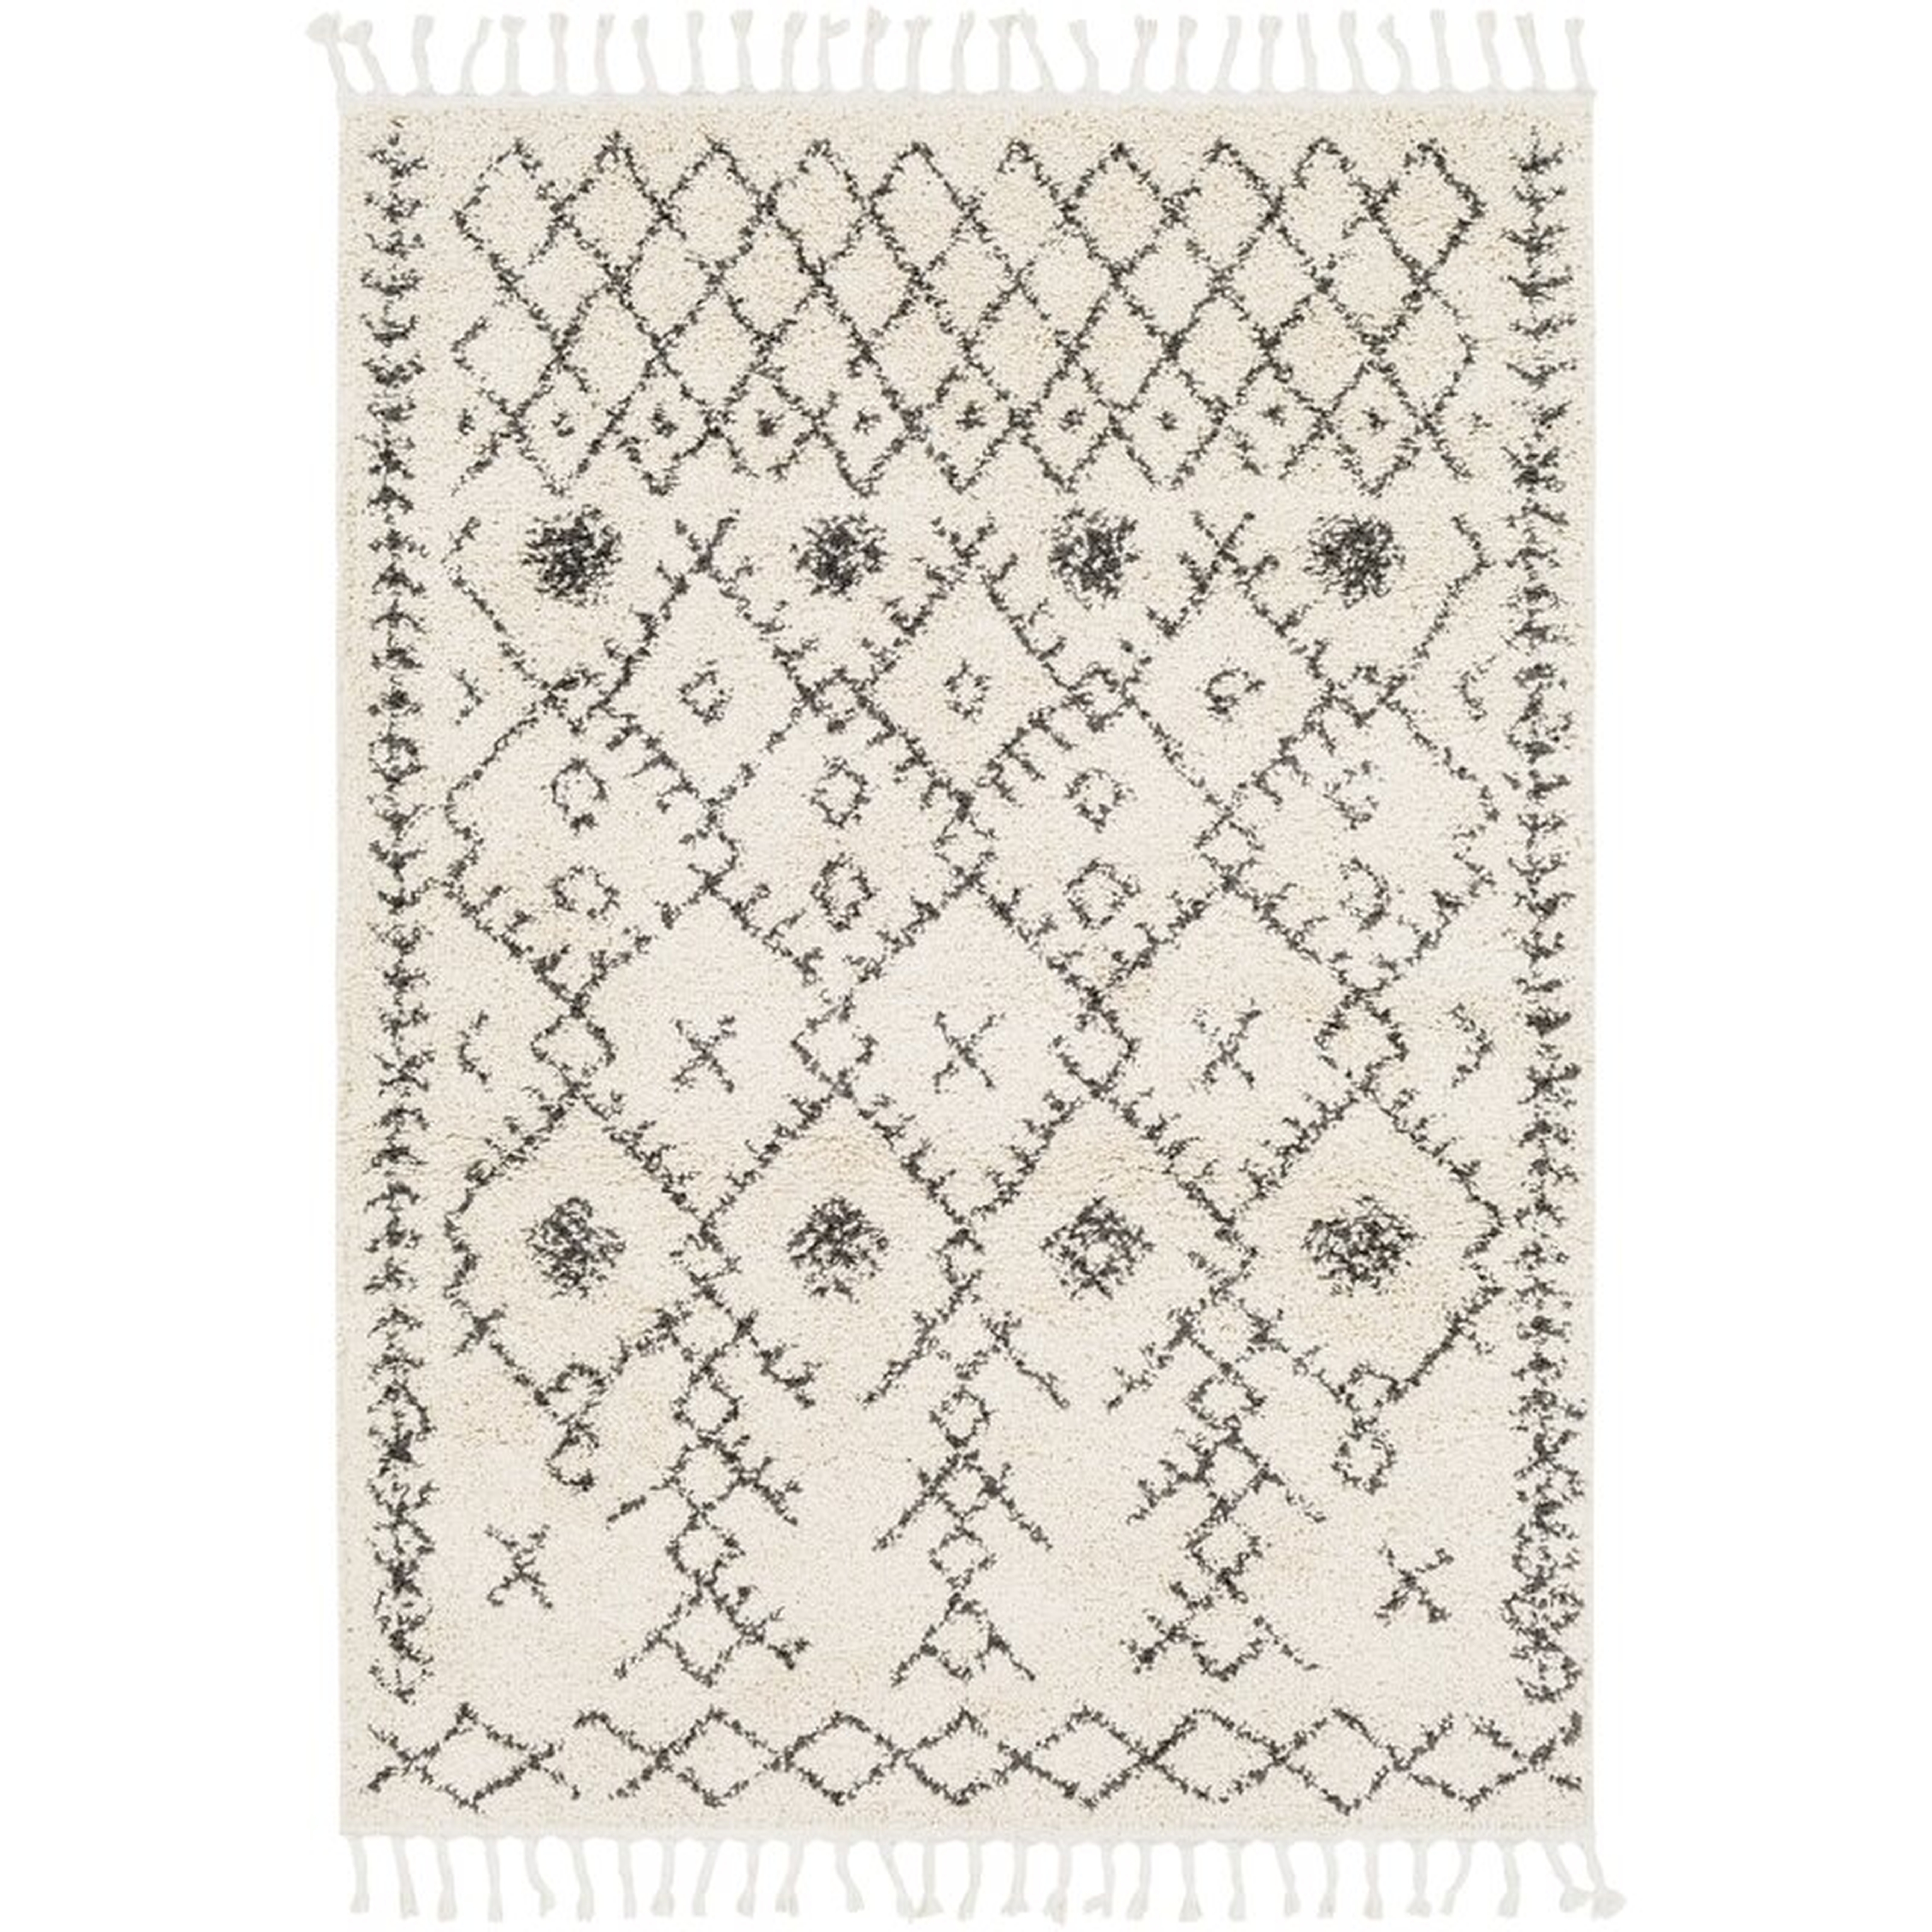 Chatham Moroccan Charcoal/Beige Area Rug - AllModern